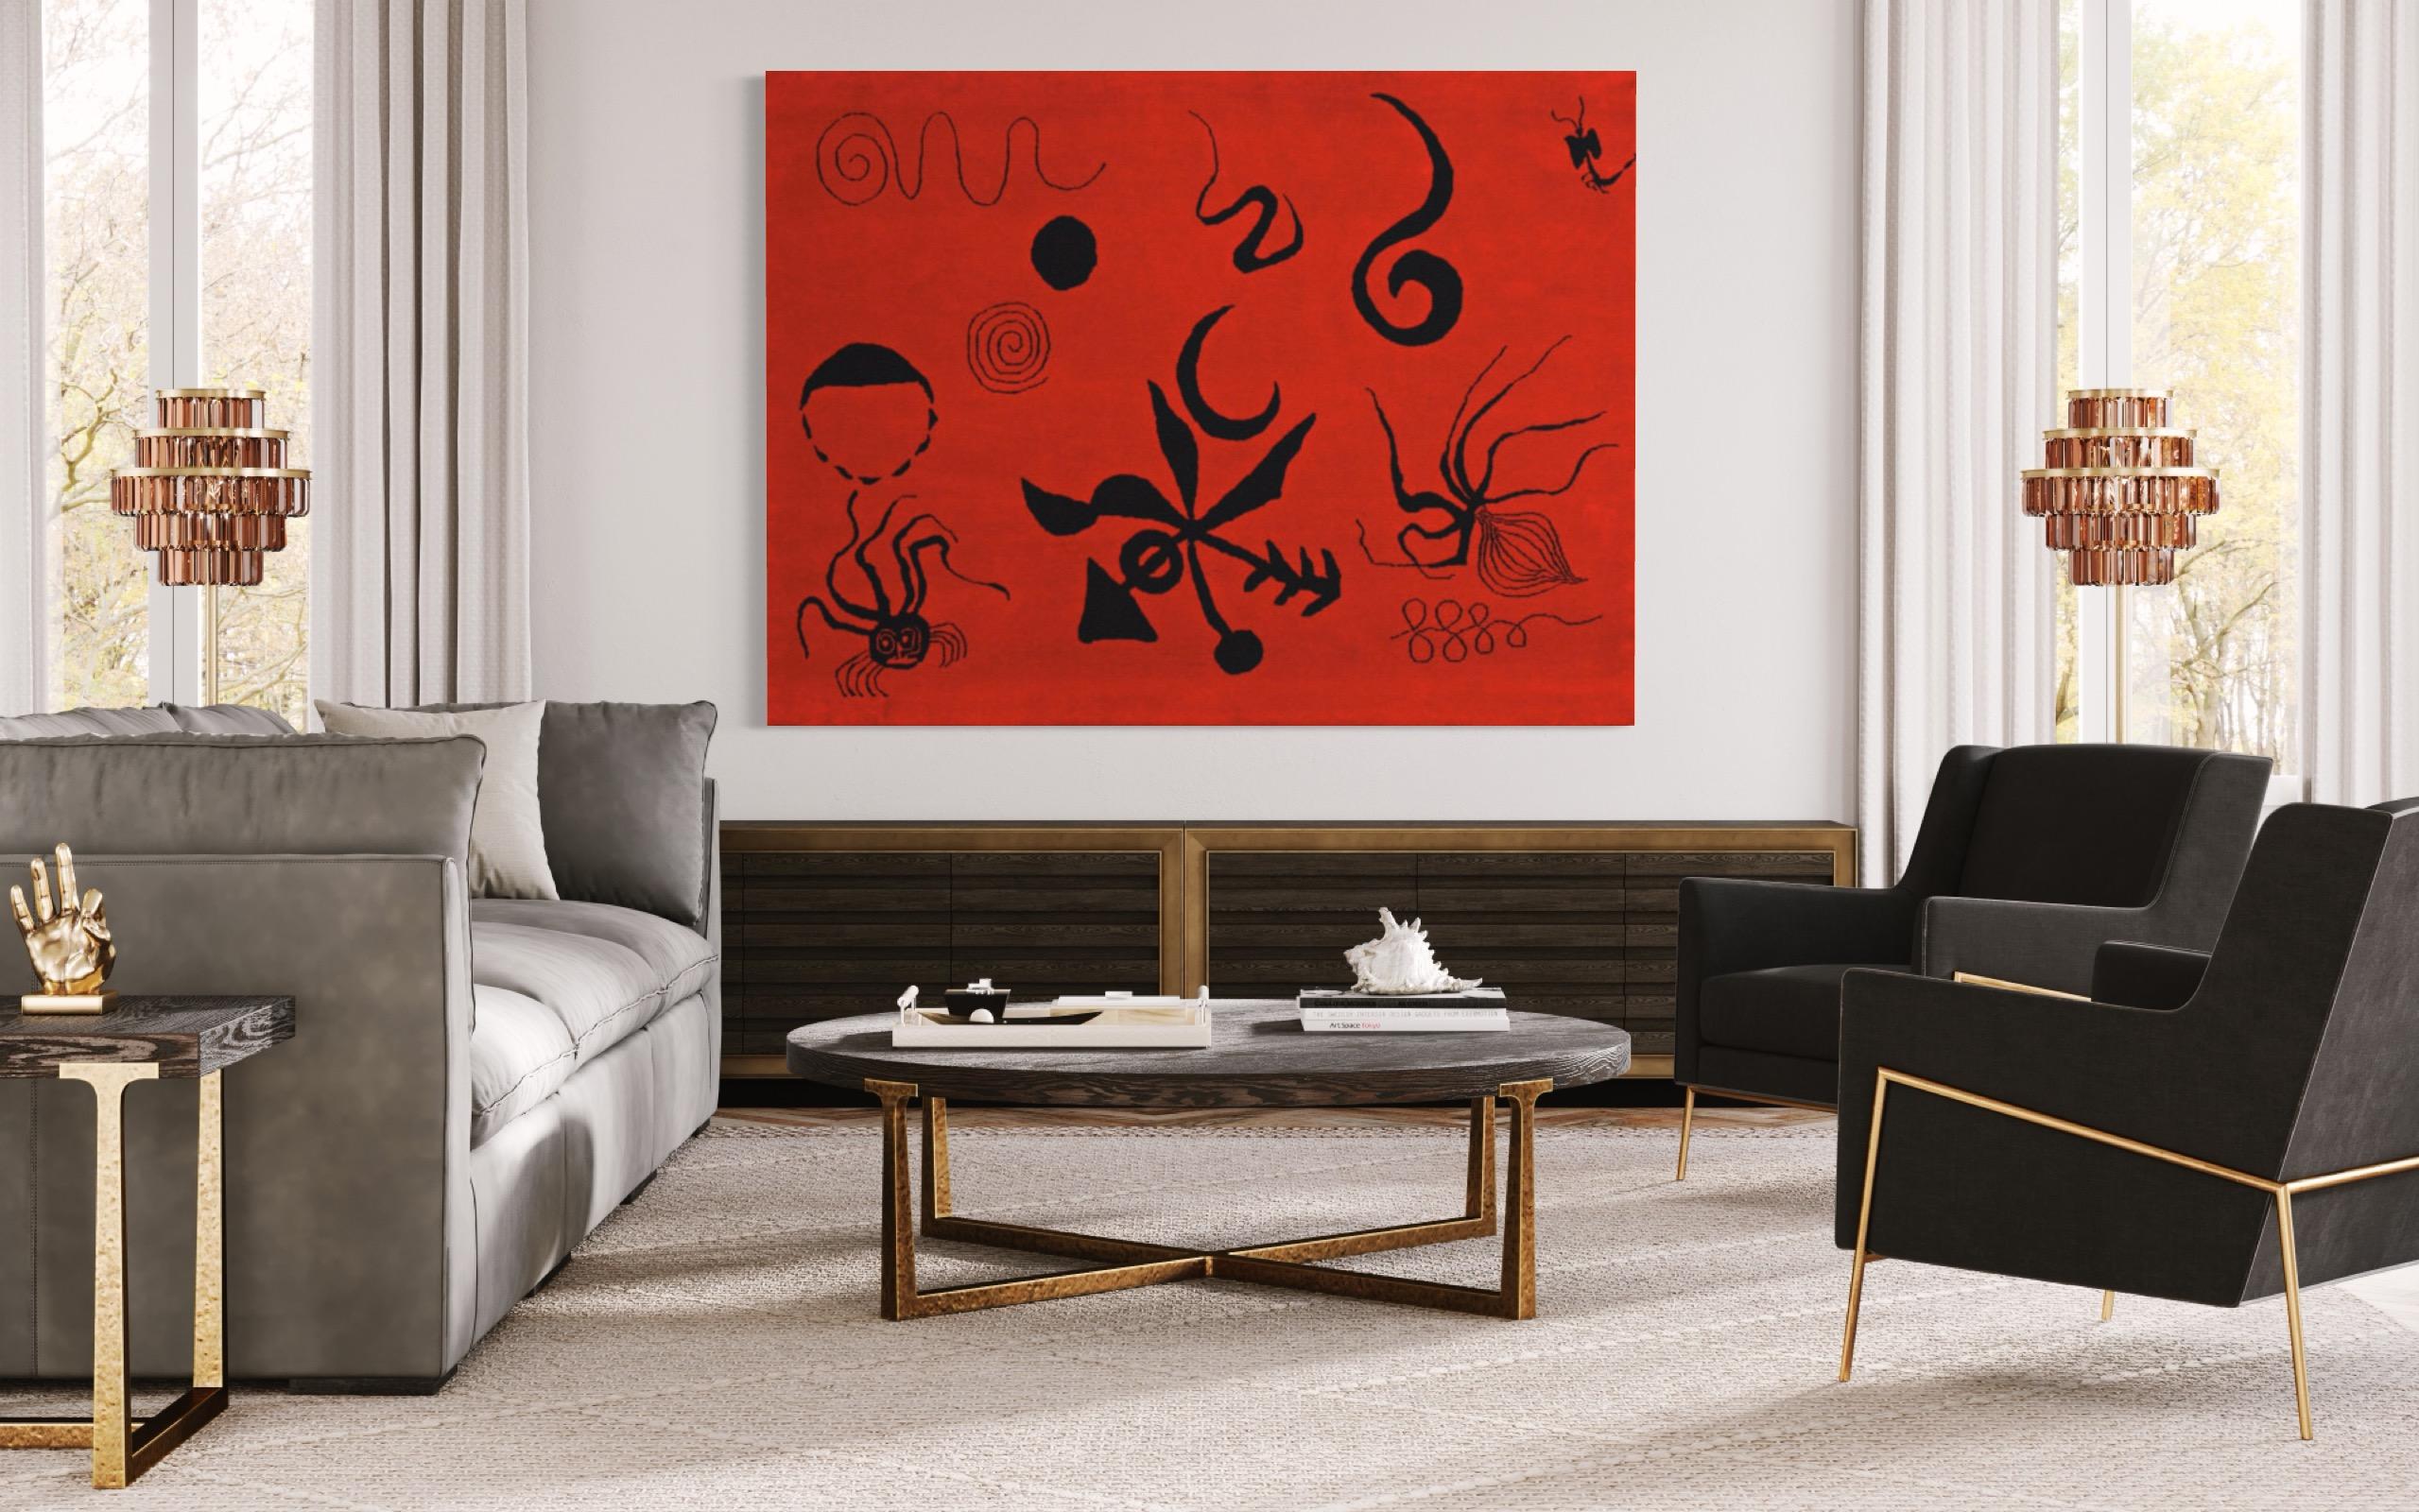 Alexander Calder
Sea Life, 1972
hand-knotted woven tapestry
Edition of 8
Signed on the Verso
Edition number might vary from what is shown in the pictures.
The artwork is offered unframed.

Alexander Calder changed the course of modern art with his